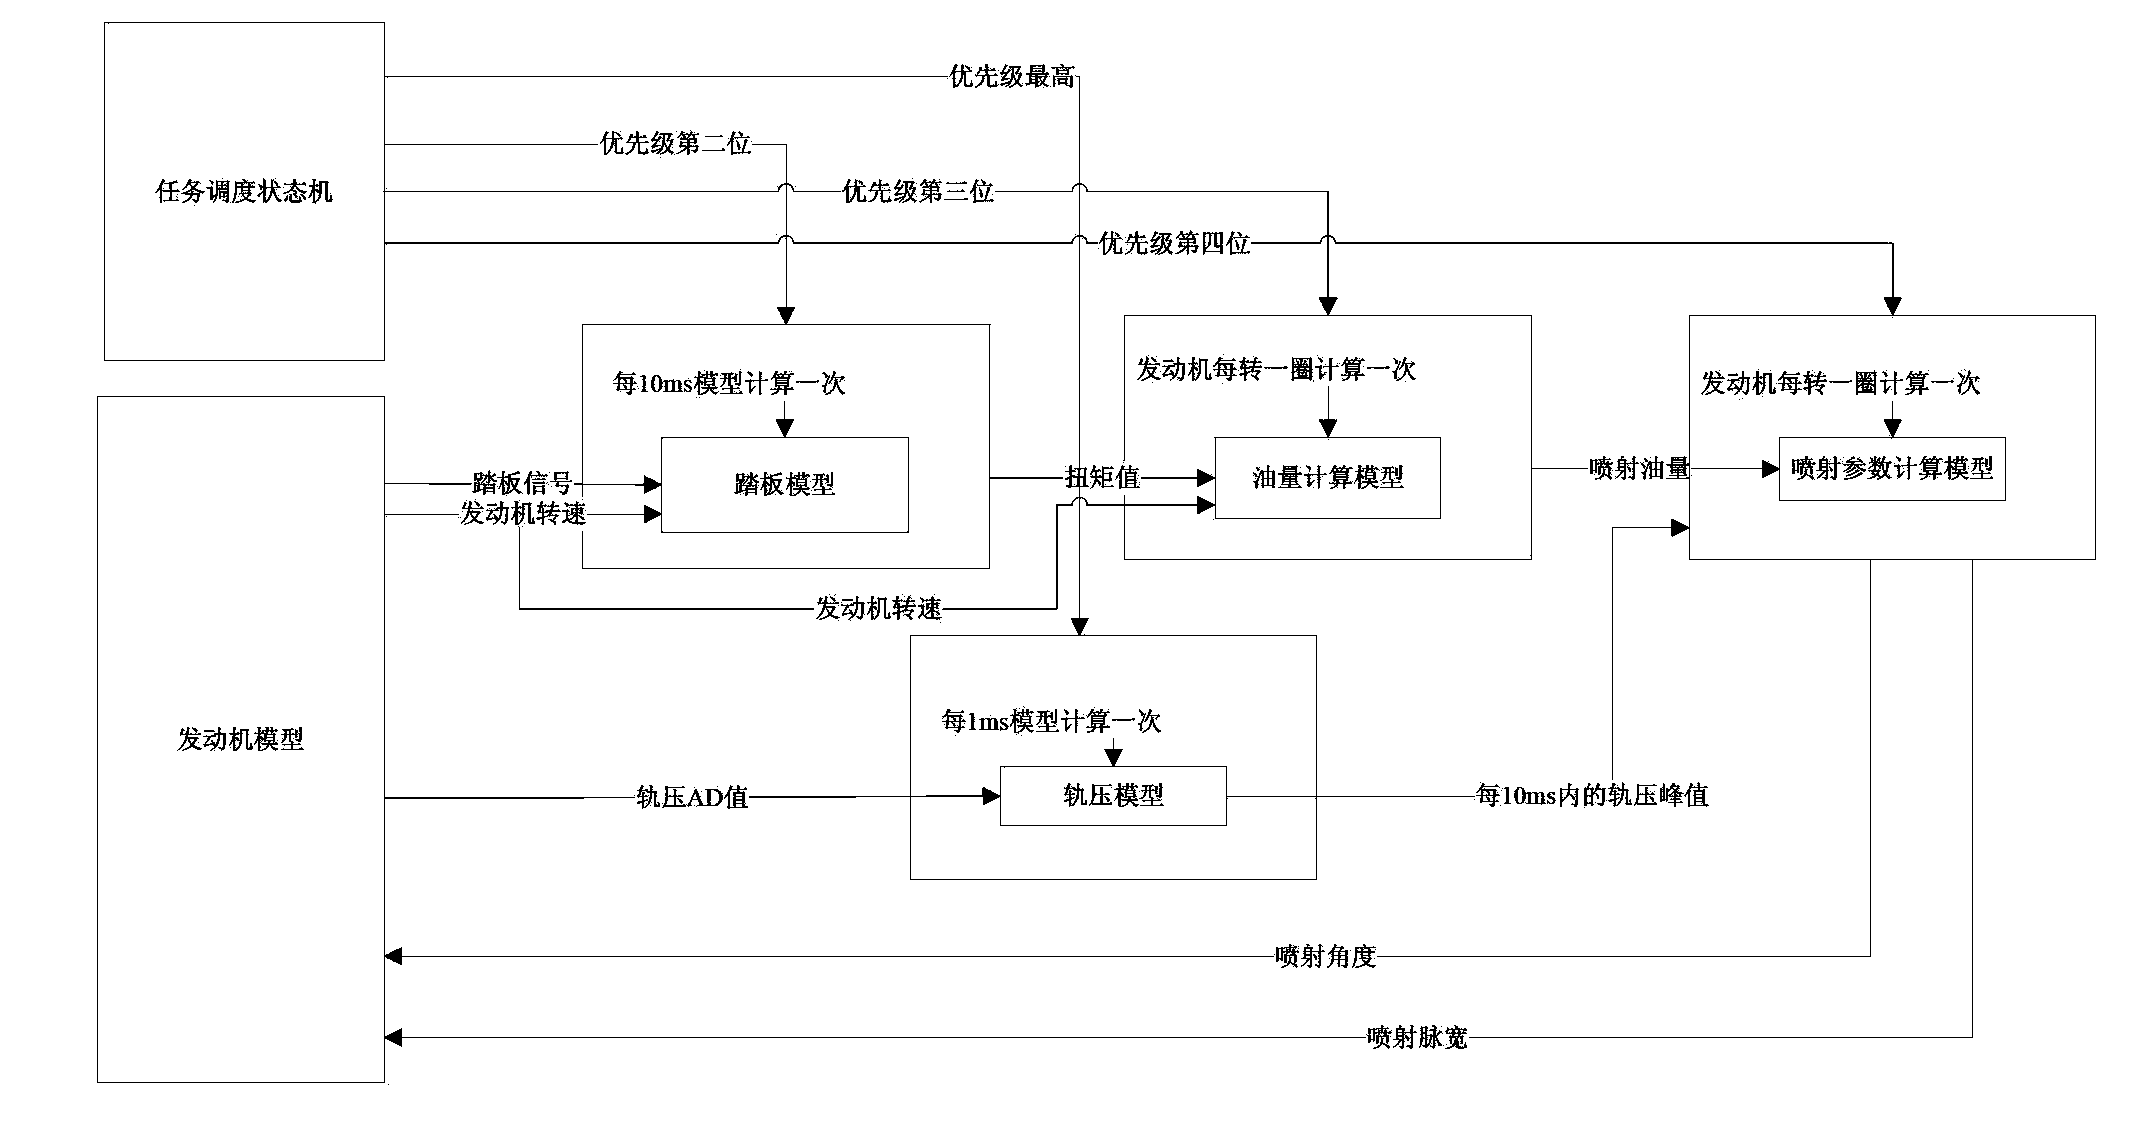 Method for verifying engine model in off-line way